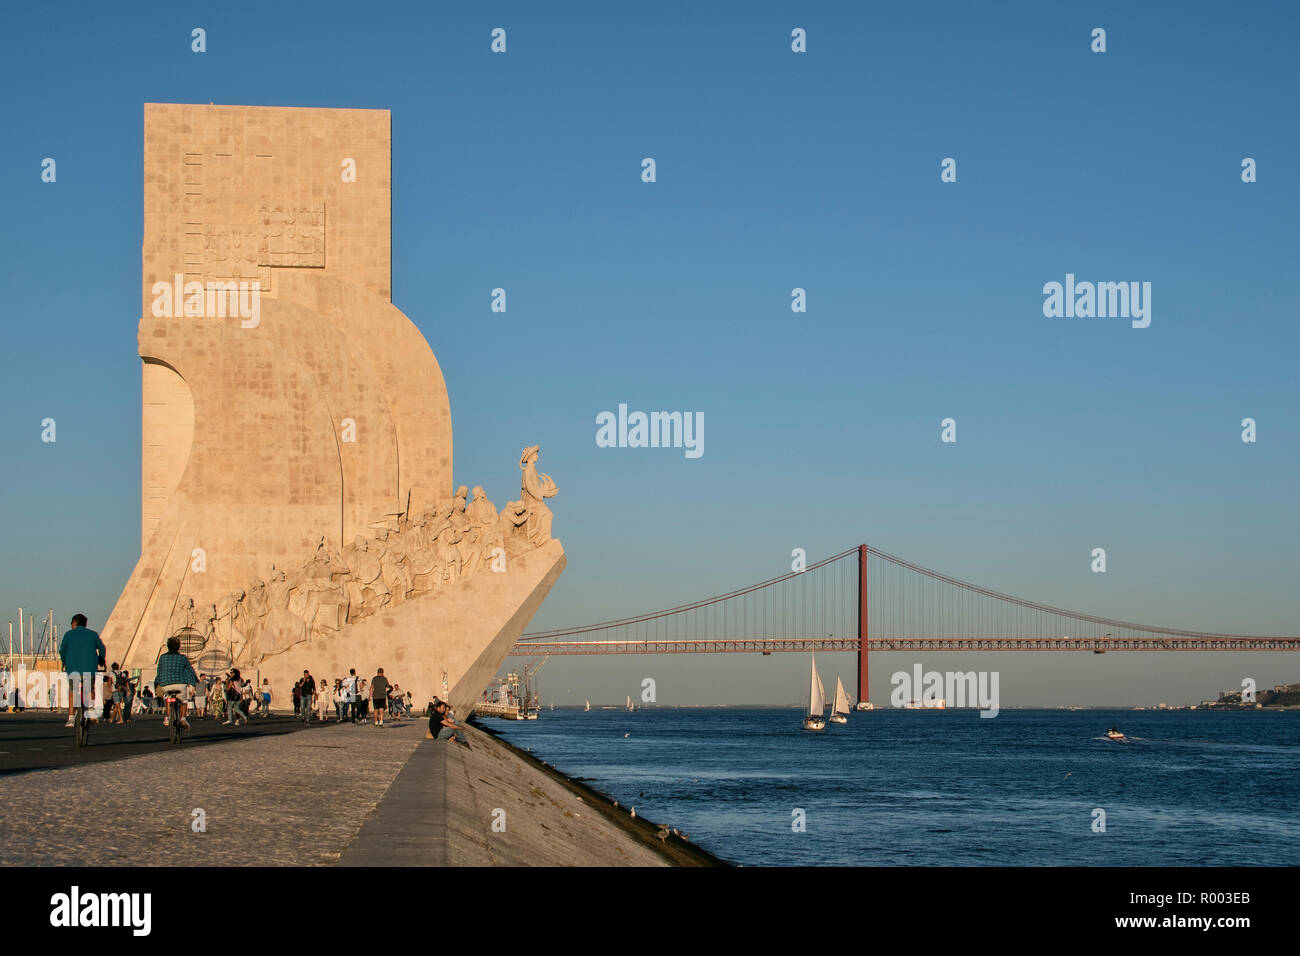 Monument to the Discoveries, Padrao dos Descobrimentos, on the banks of the Tagus River  (Rio Tejo) in the Belem district, Lisbon, Portugal. Stock Photo